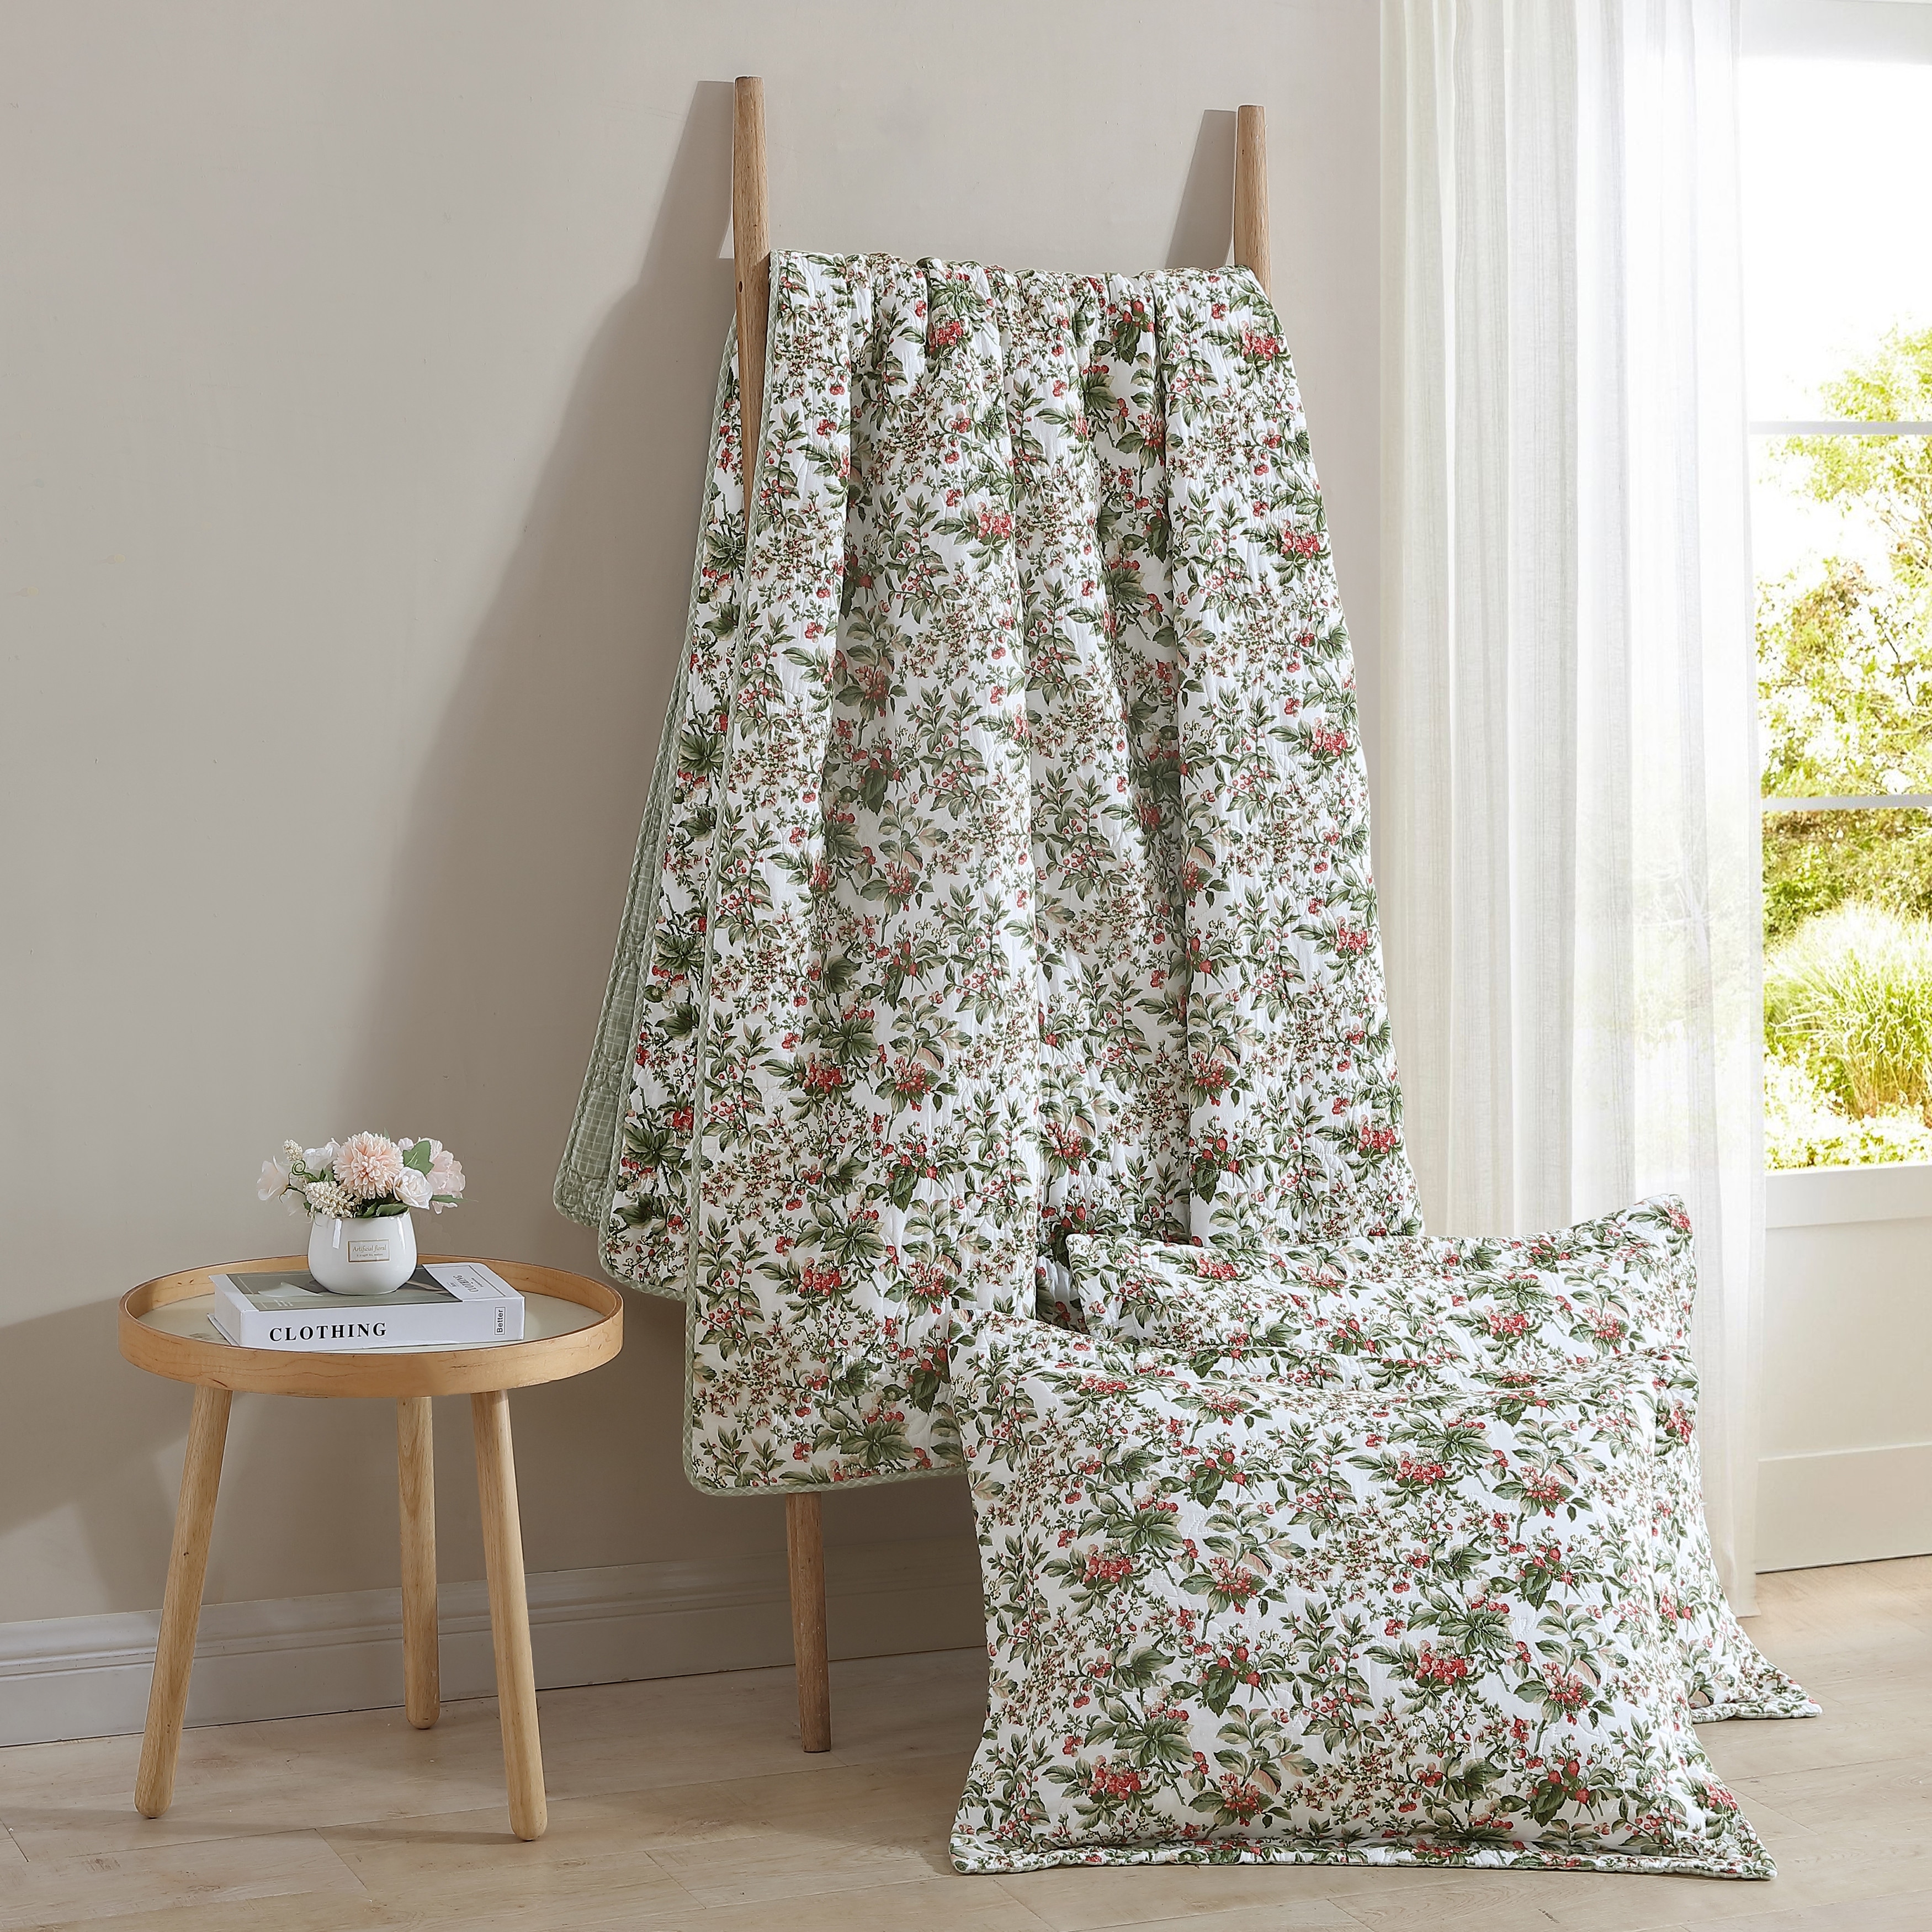 https://ak1.ostkcdn.com/images/products/is/images/direct/a70f0971891f7c1e38f6c365975cb529ef71b584/Laura-Ashley-Bramble-Floral-Cotton-Reversible-Green-Quilt-Set.jpg